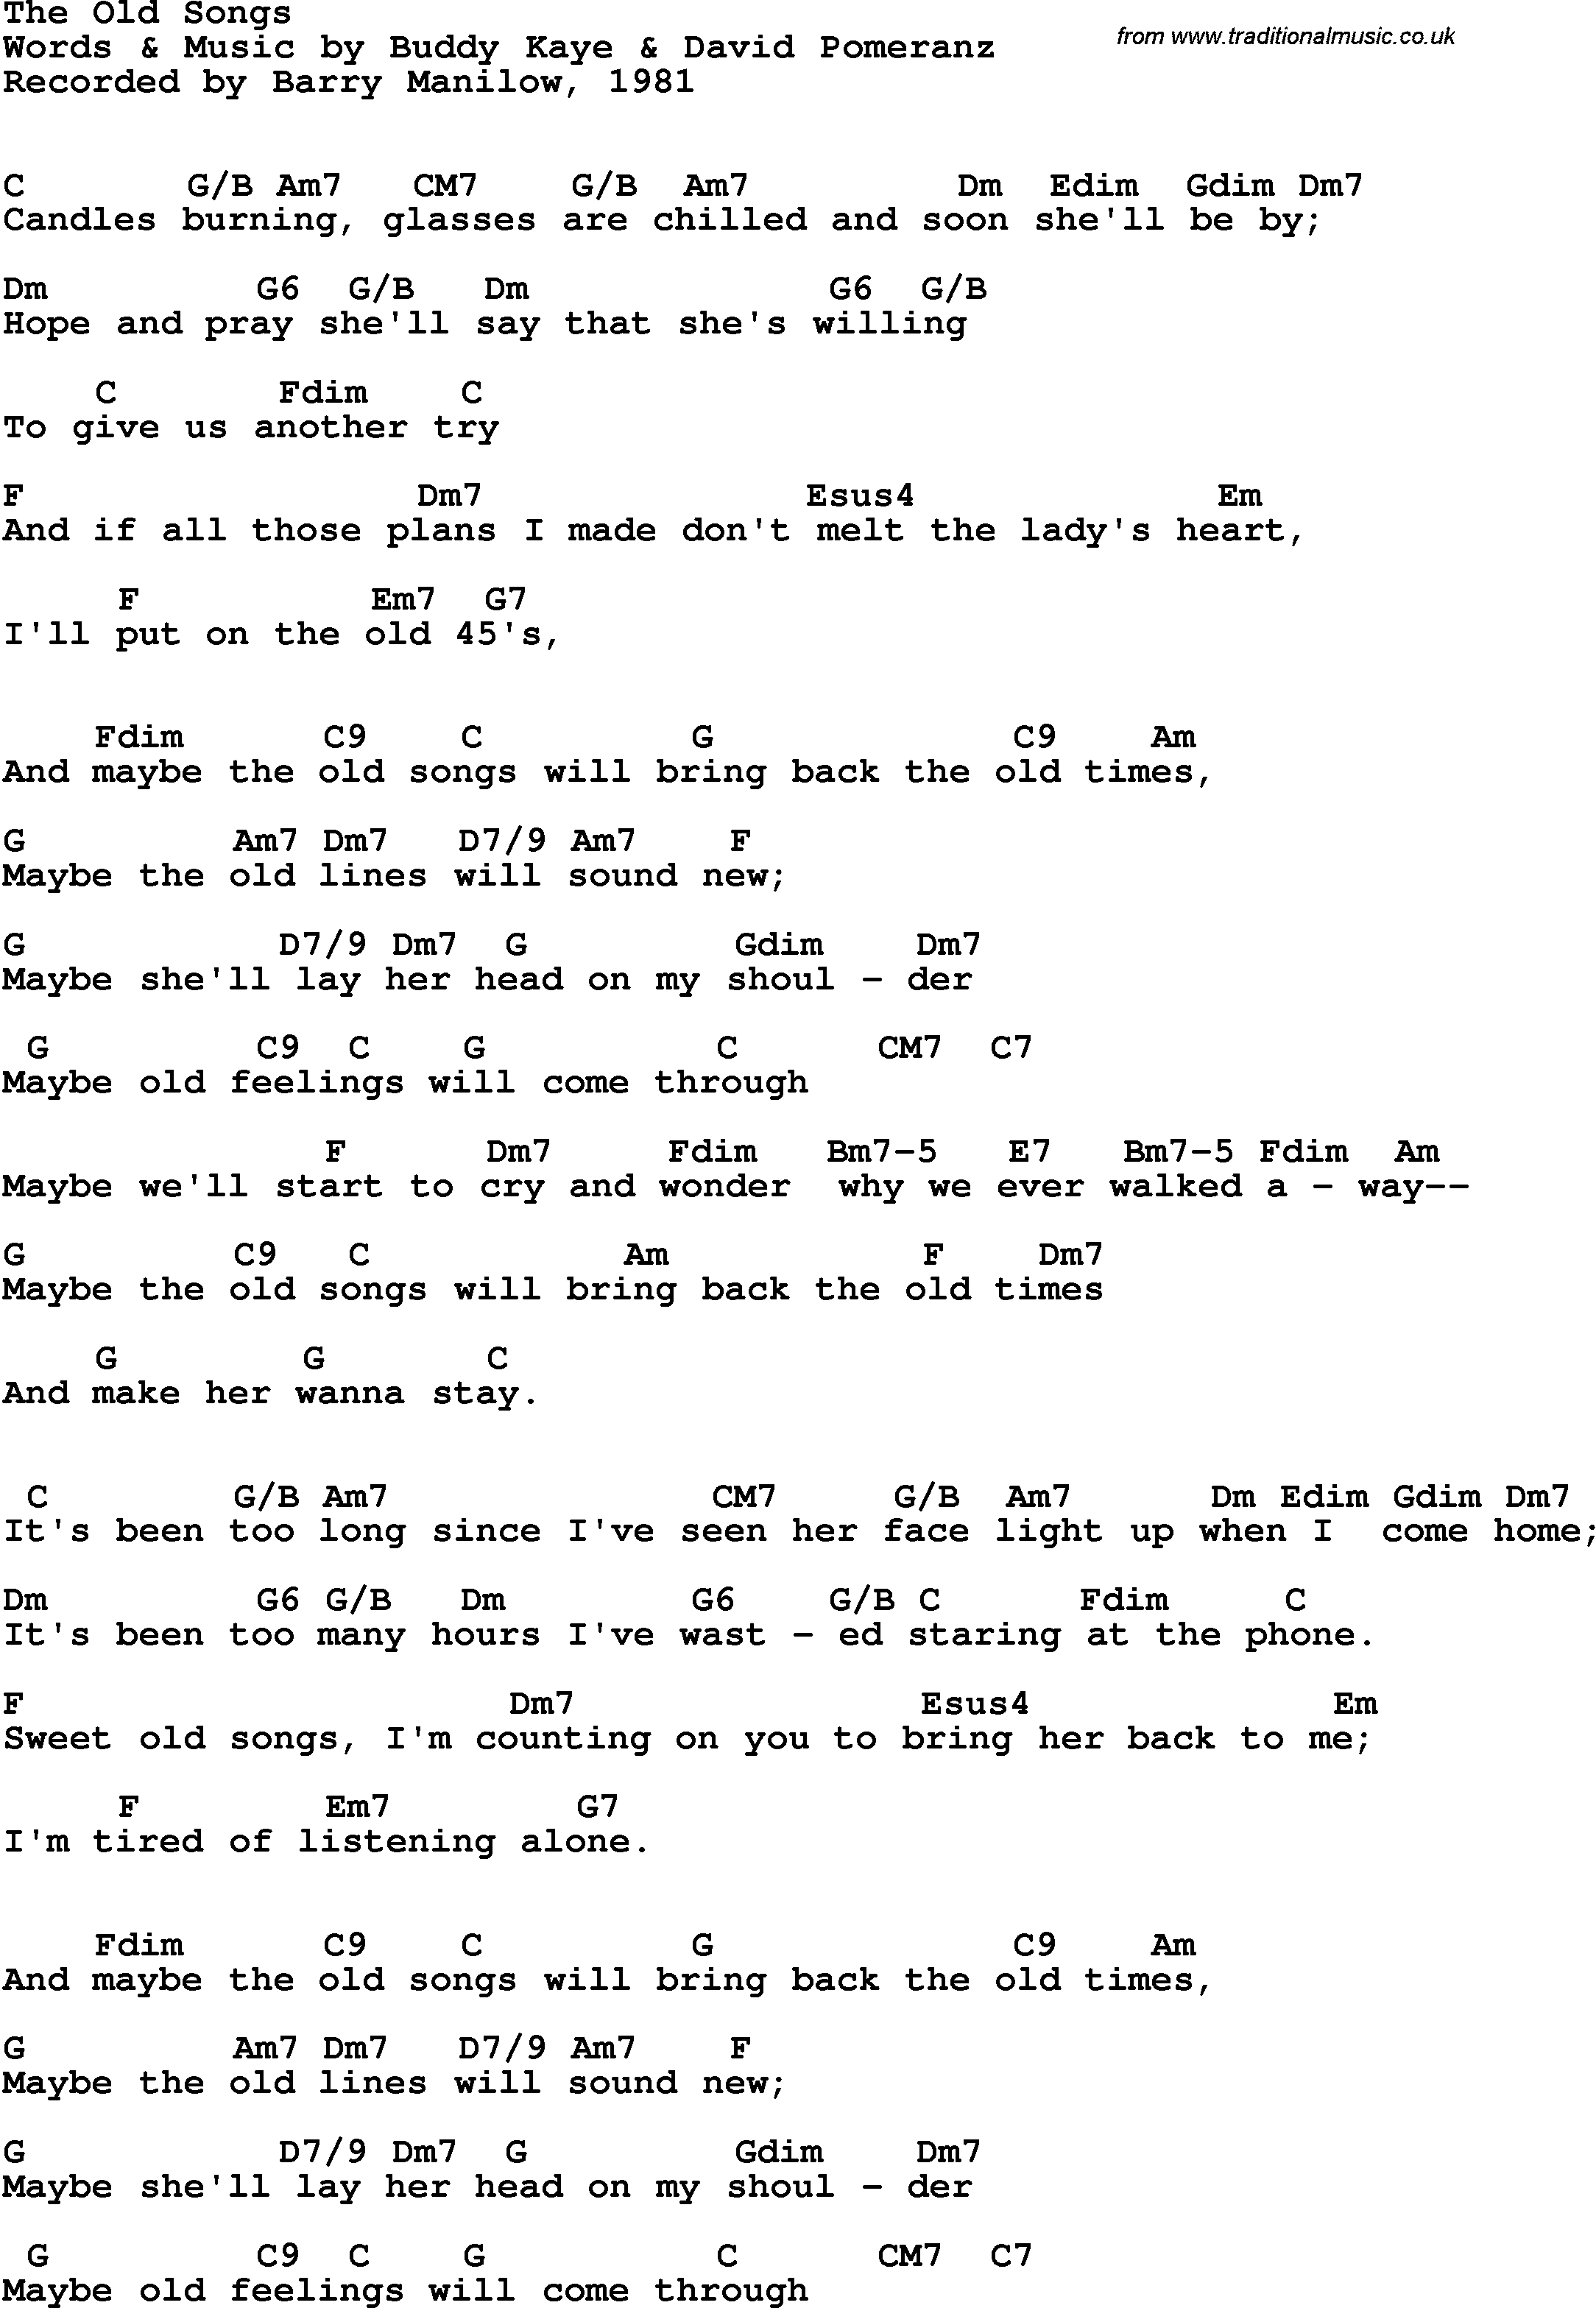 Song Lyrics with guitar chords for Old Songs, The - Barry Manilow, 1981